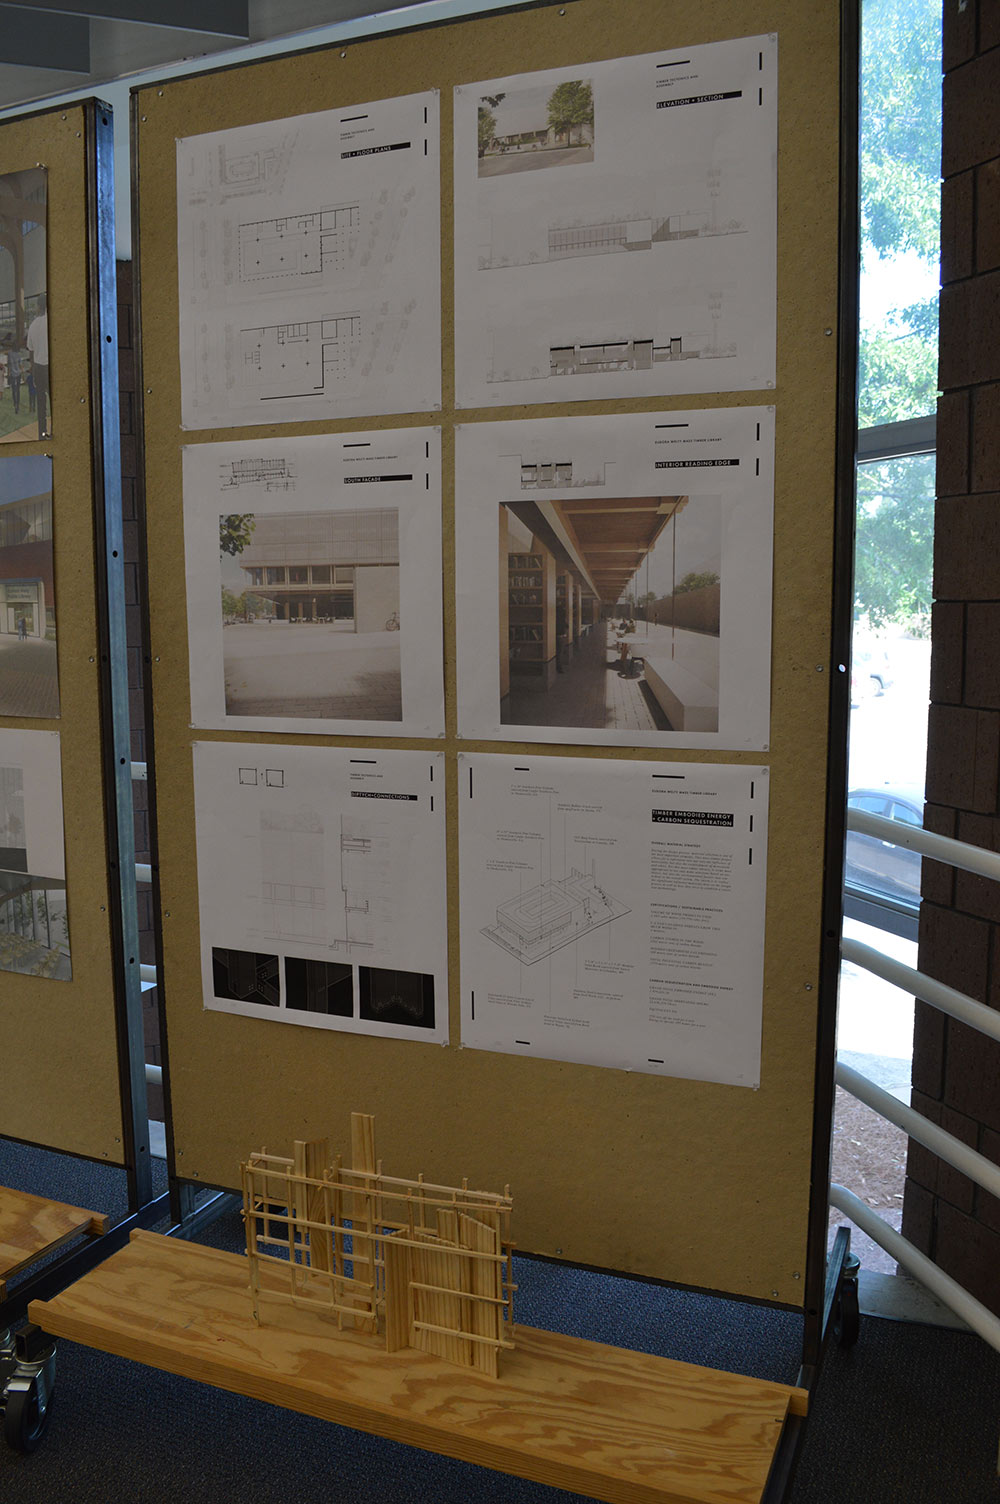 A pin up board inside the gallery that features information about one of the projects.